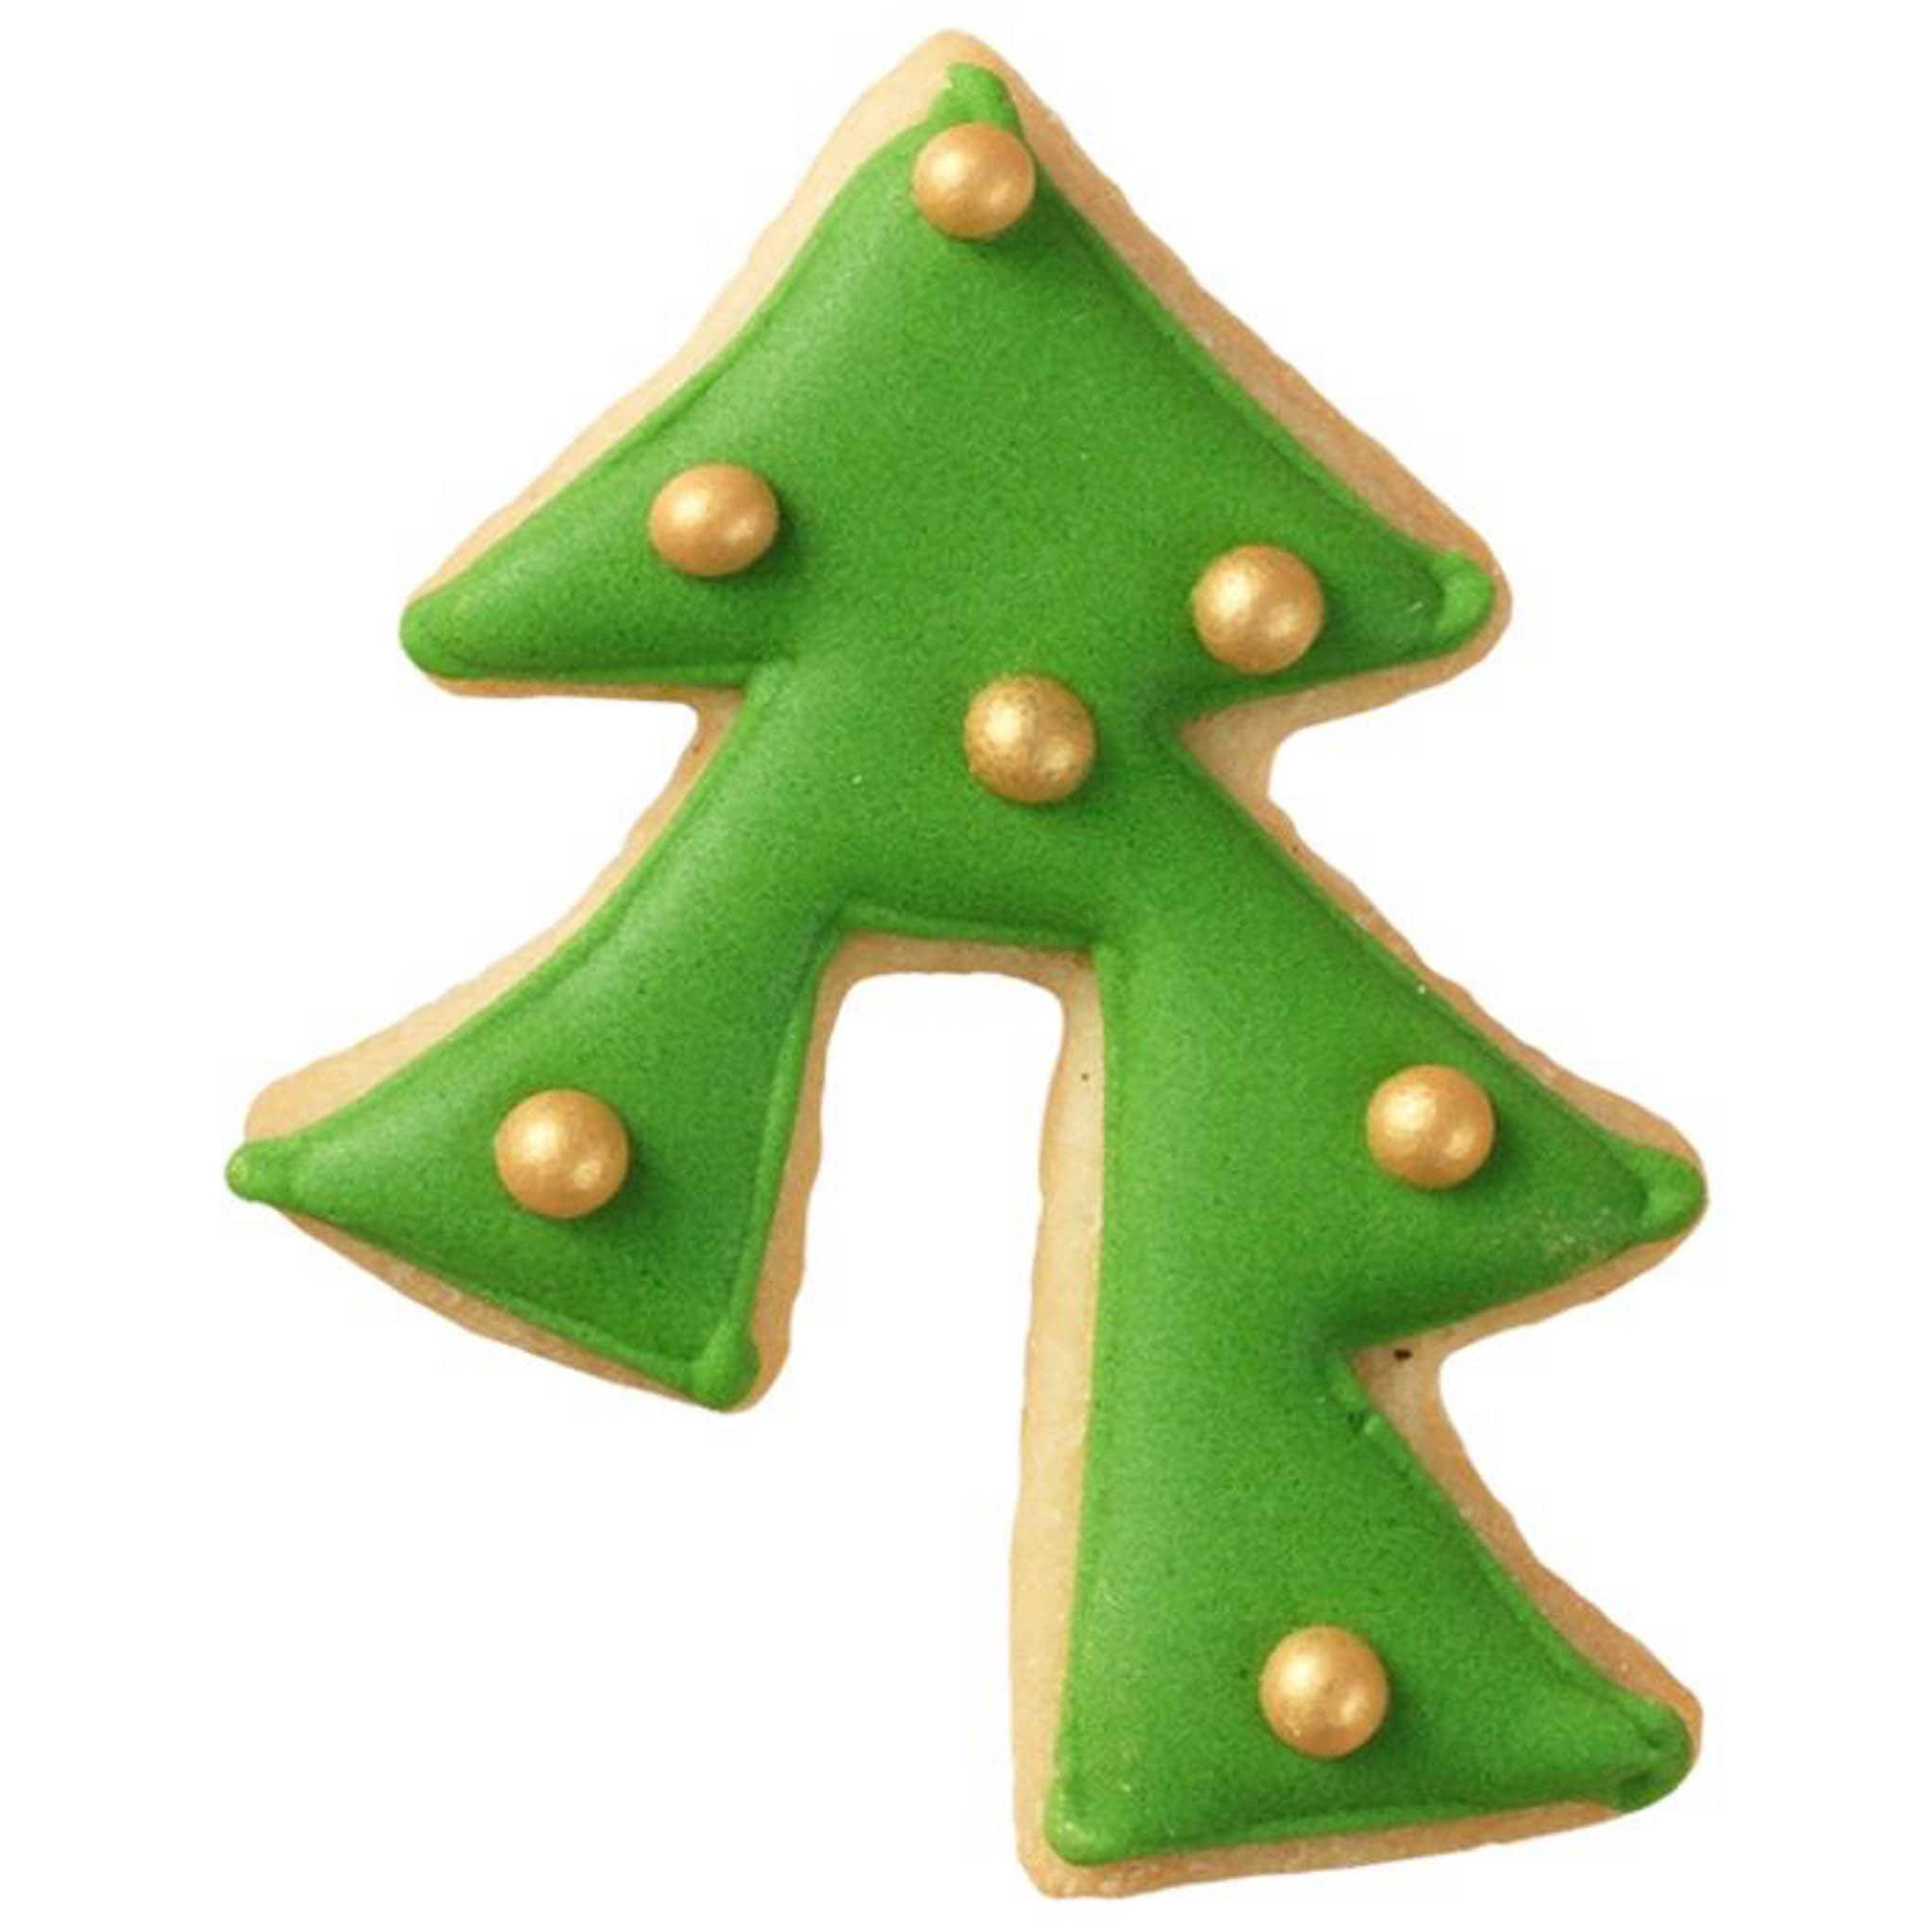 Stainless Steel 3D Christmas Tree Cookie Cutter, 5.5cm